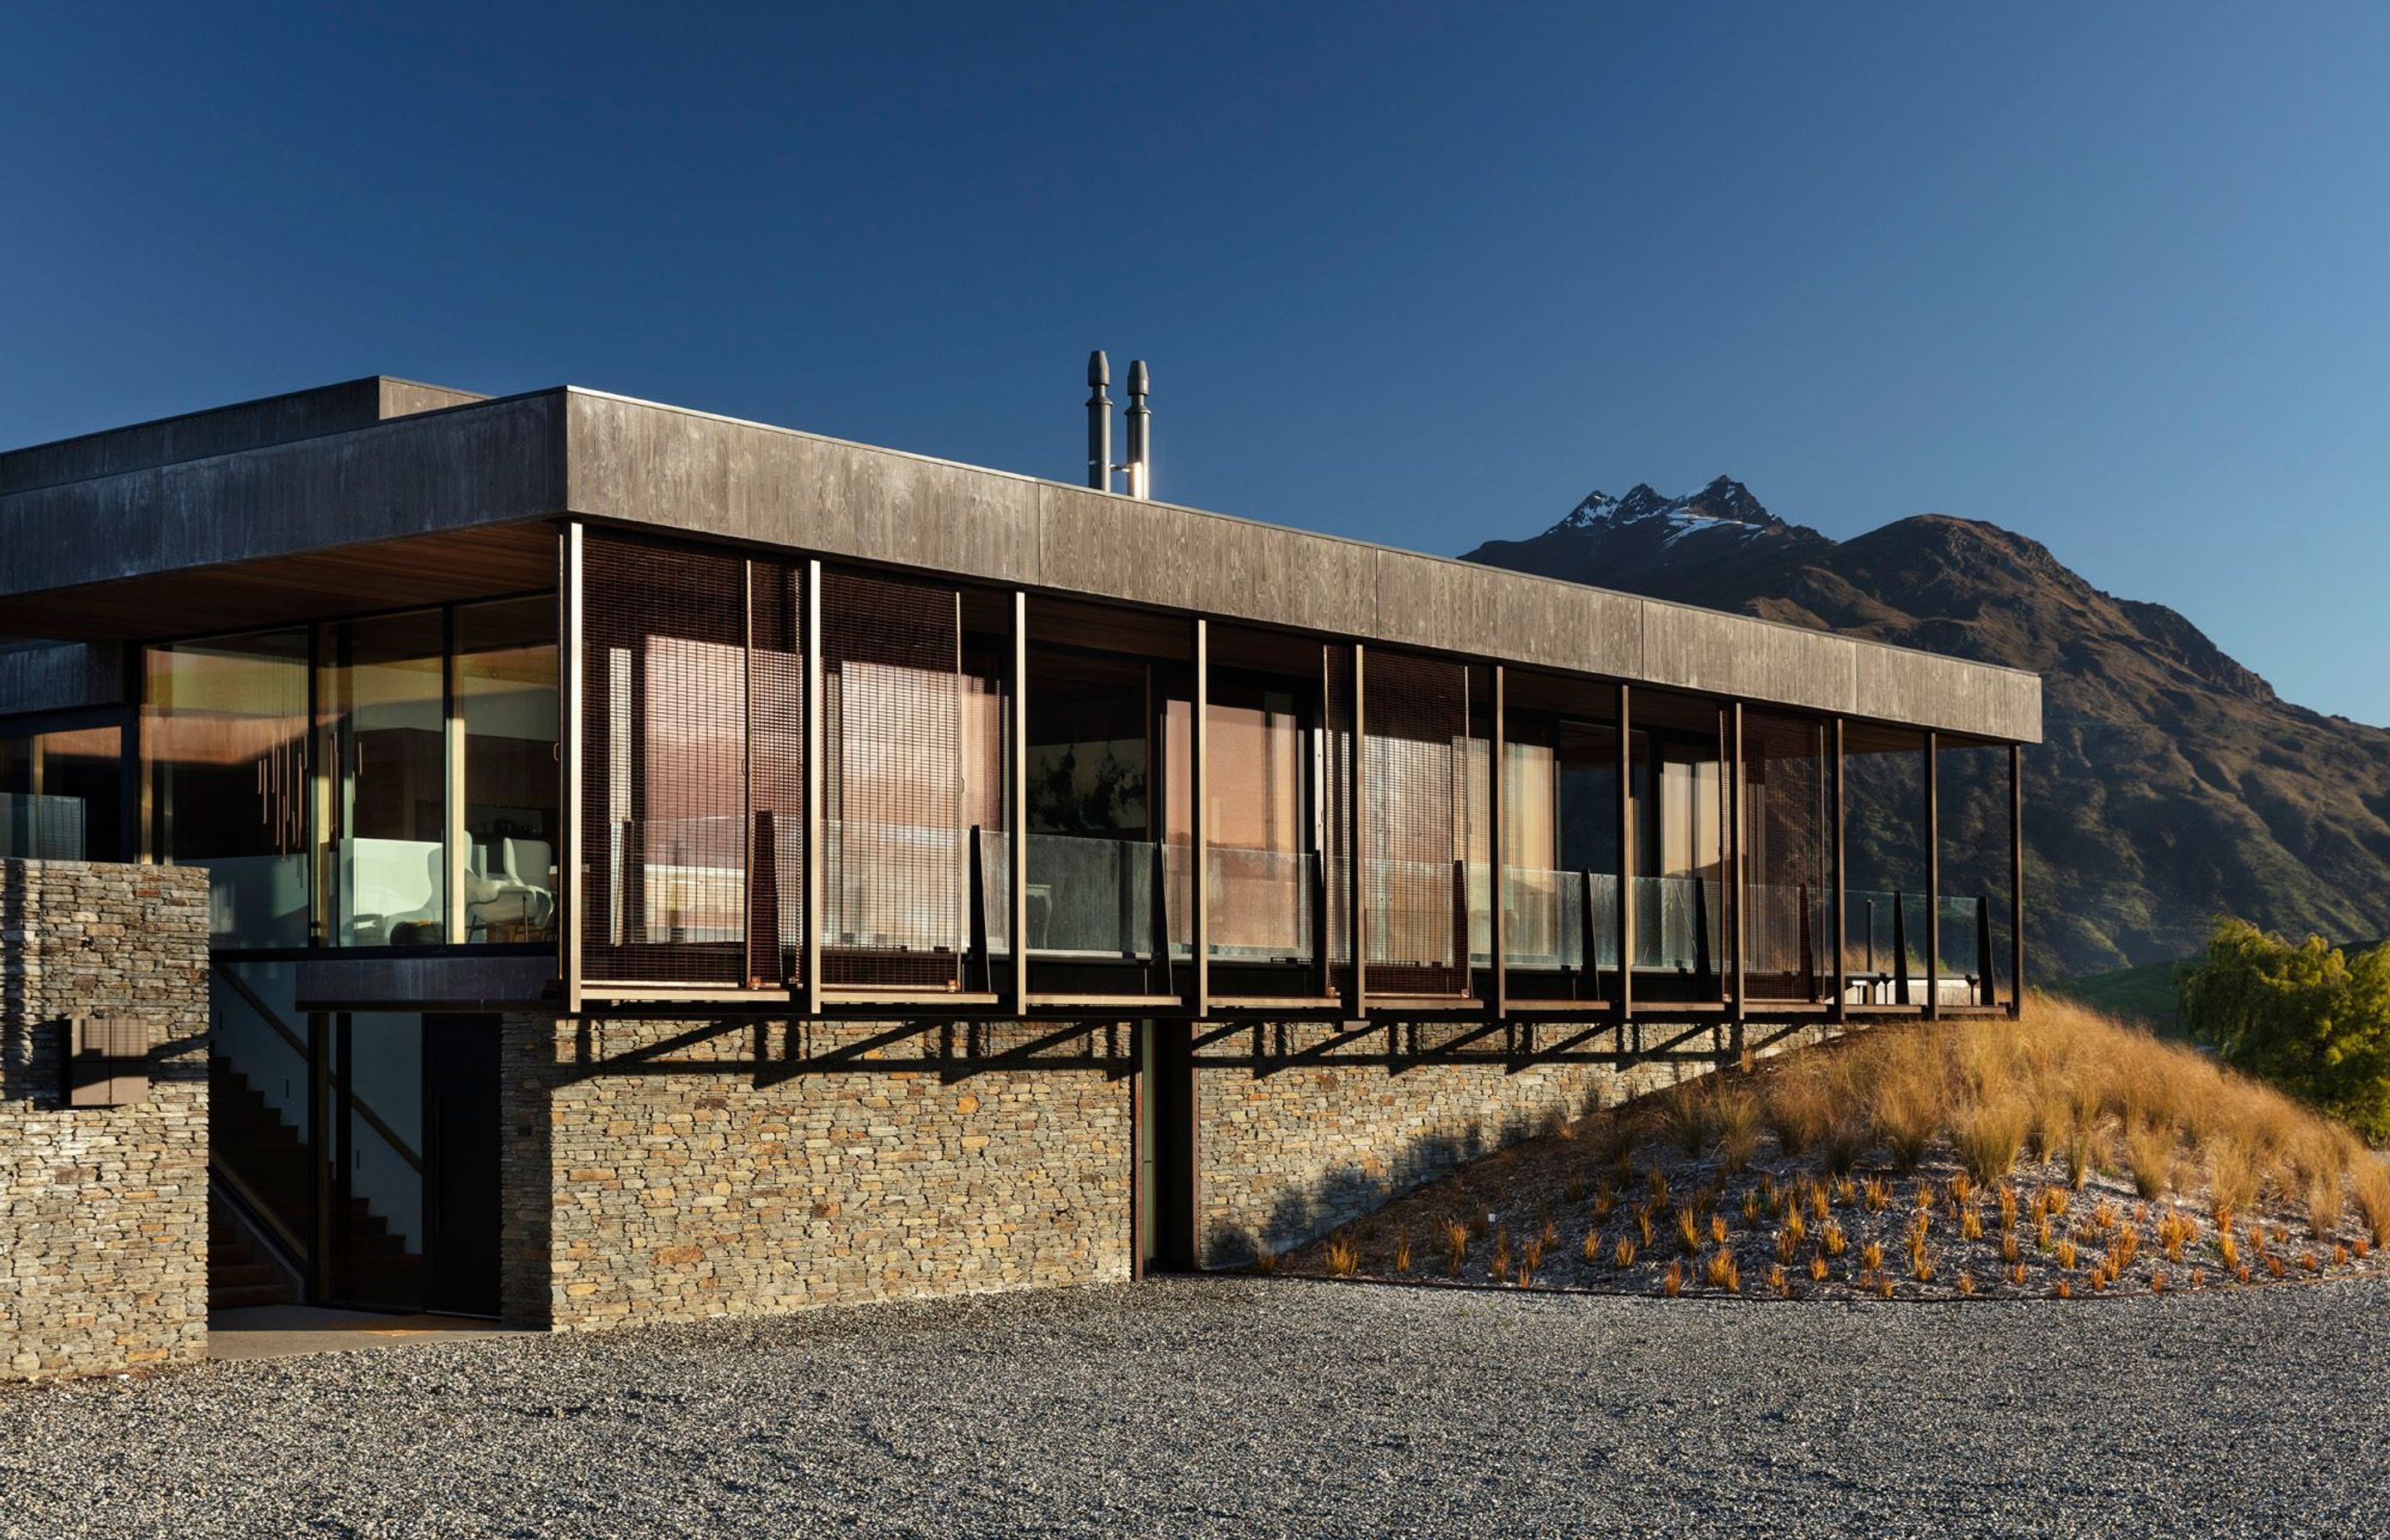 An exterior in natural schist stone, Corten steel and concrete helps to blend Oliver's RIdge into the surrounding landscape.